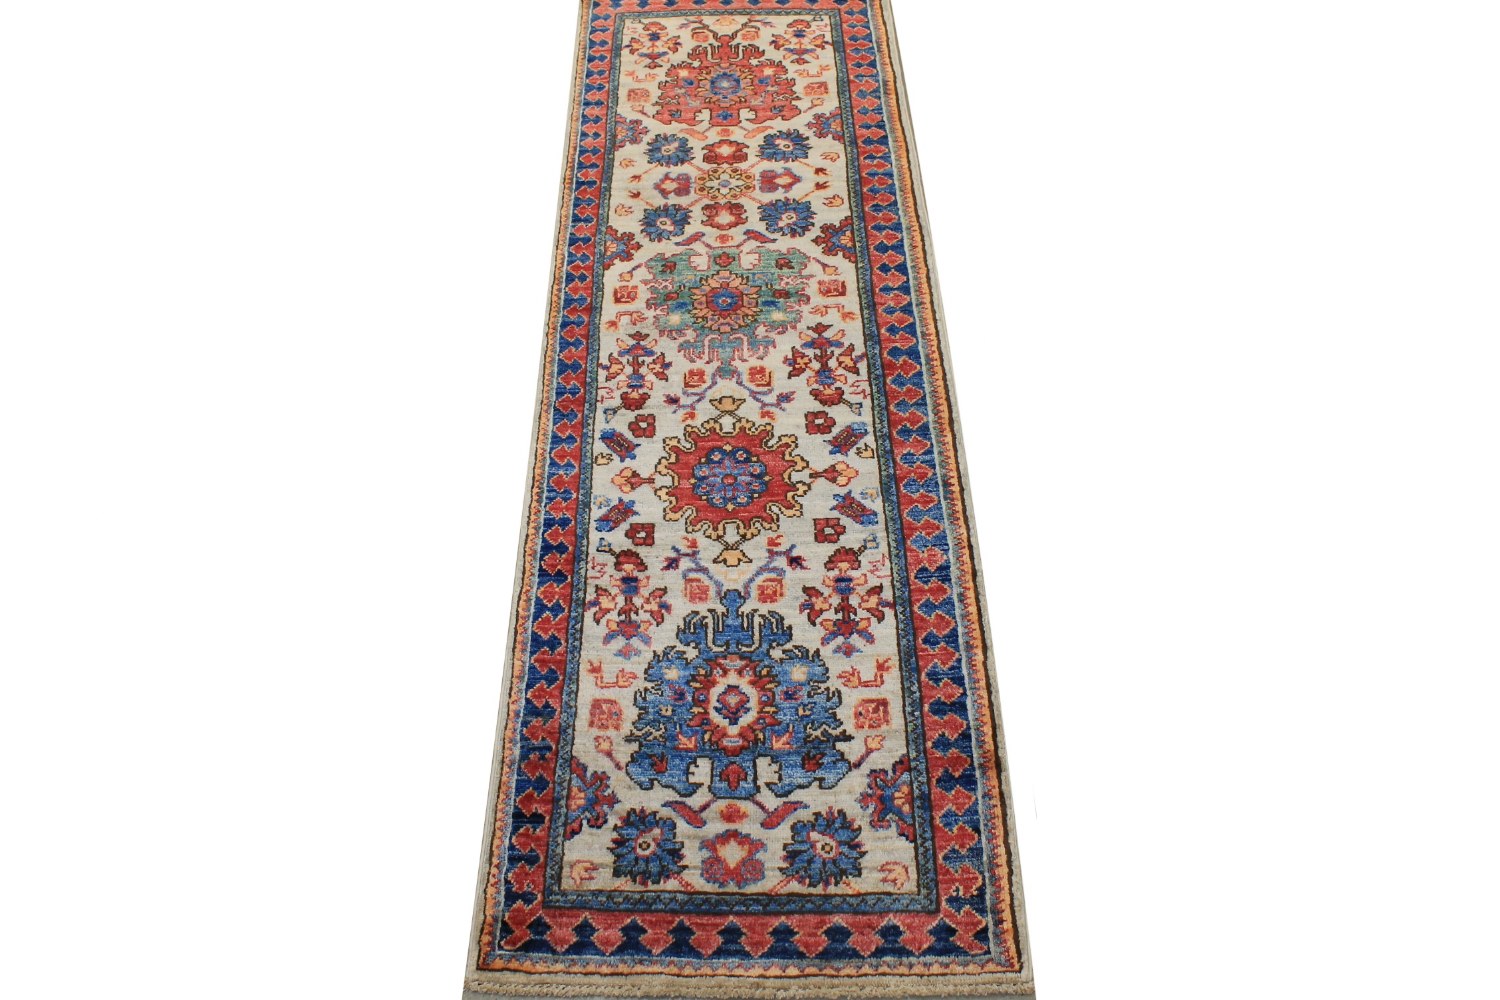 6 ft. Runner Aryana & Antique Revivals Hand Knotted Wool Area Rug - MR026049